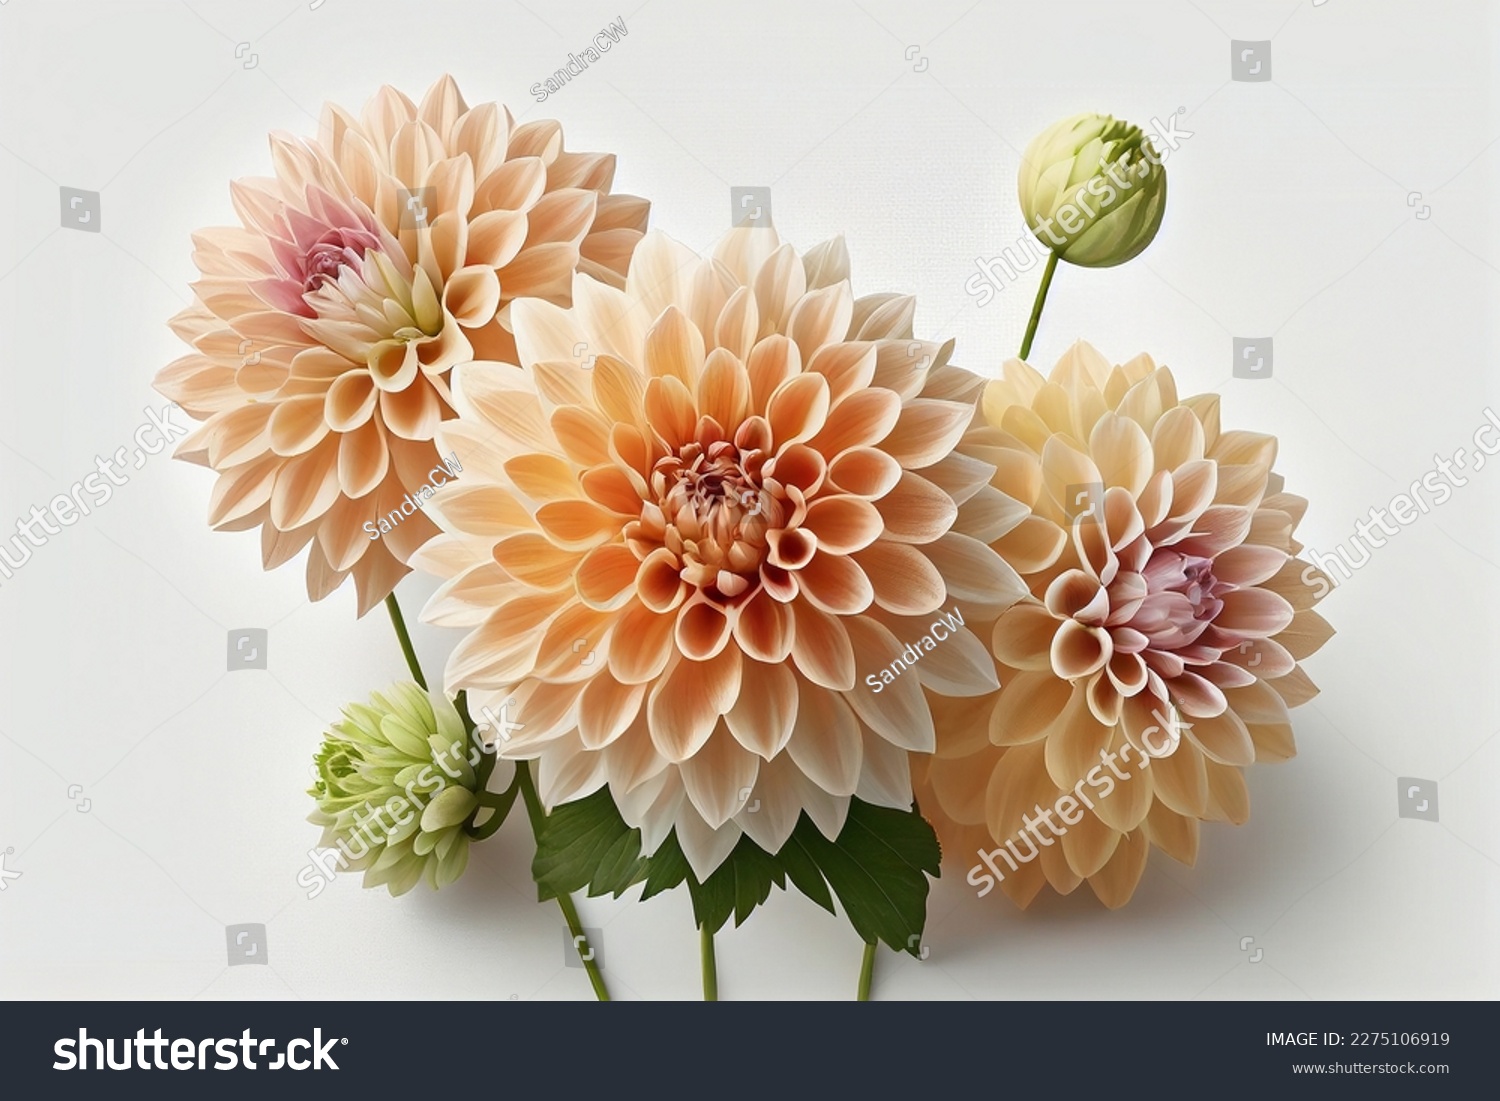 Flowers creative composition. Bouquet of dahlia flowers plant with leaves isolated on white background. Flat lay, top view, copy space	
 #2275106919